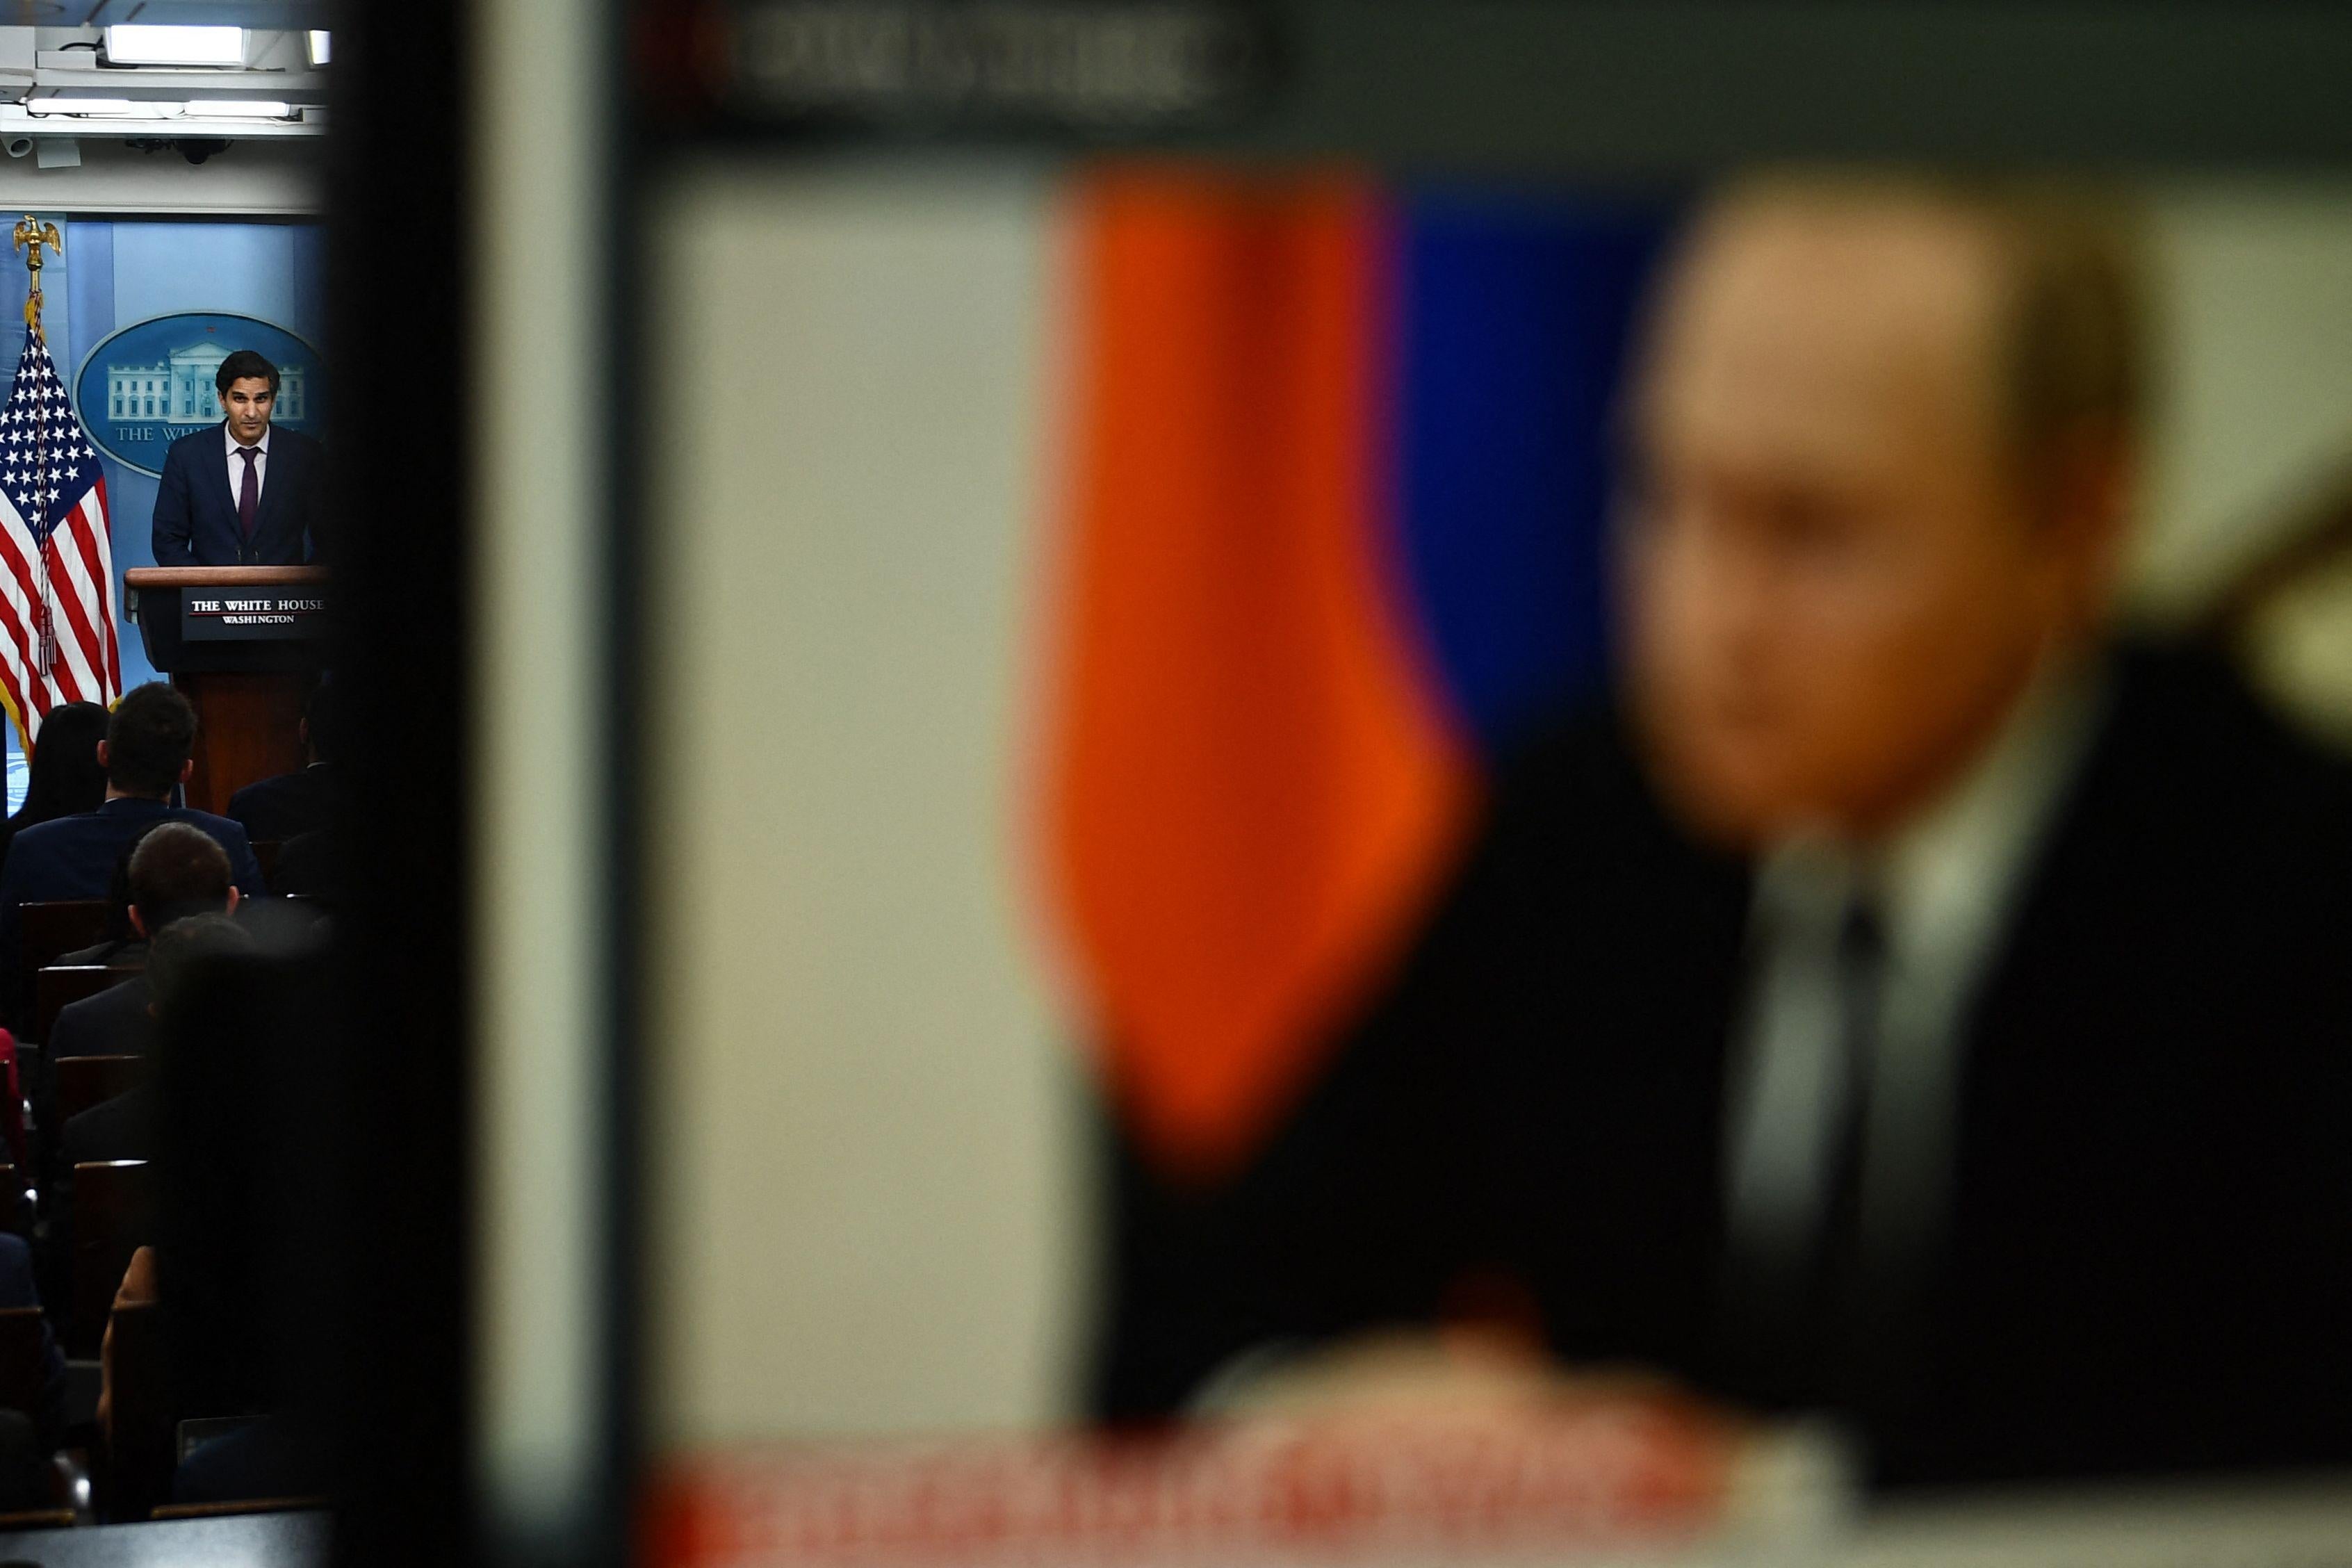 Vladimir Putin pictured on a monitor out of focus in the foreground with deputy national security adviser Daleep Singh speaking at a podium in the White House press briefing room in focus in the background